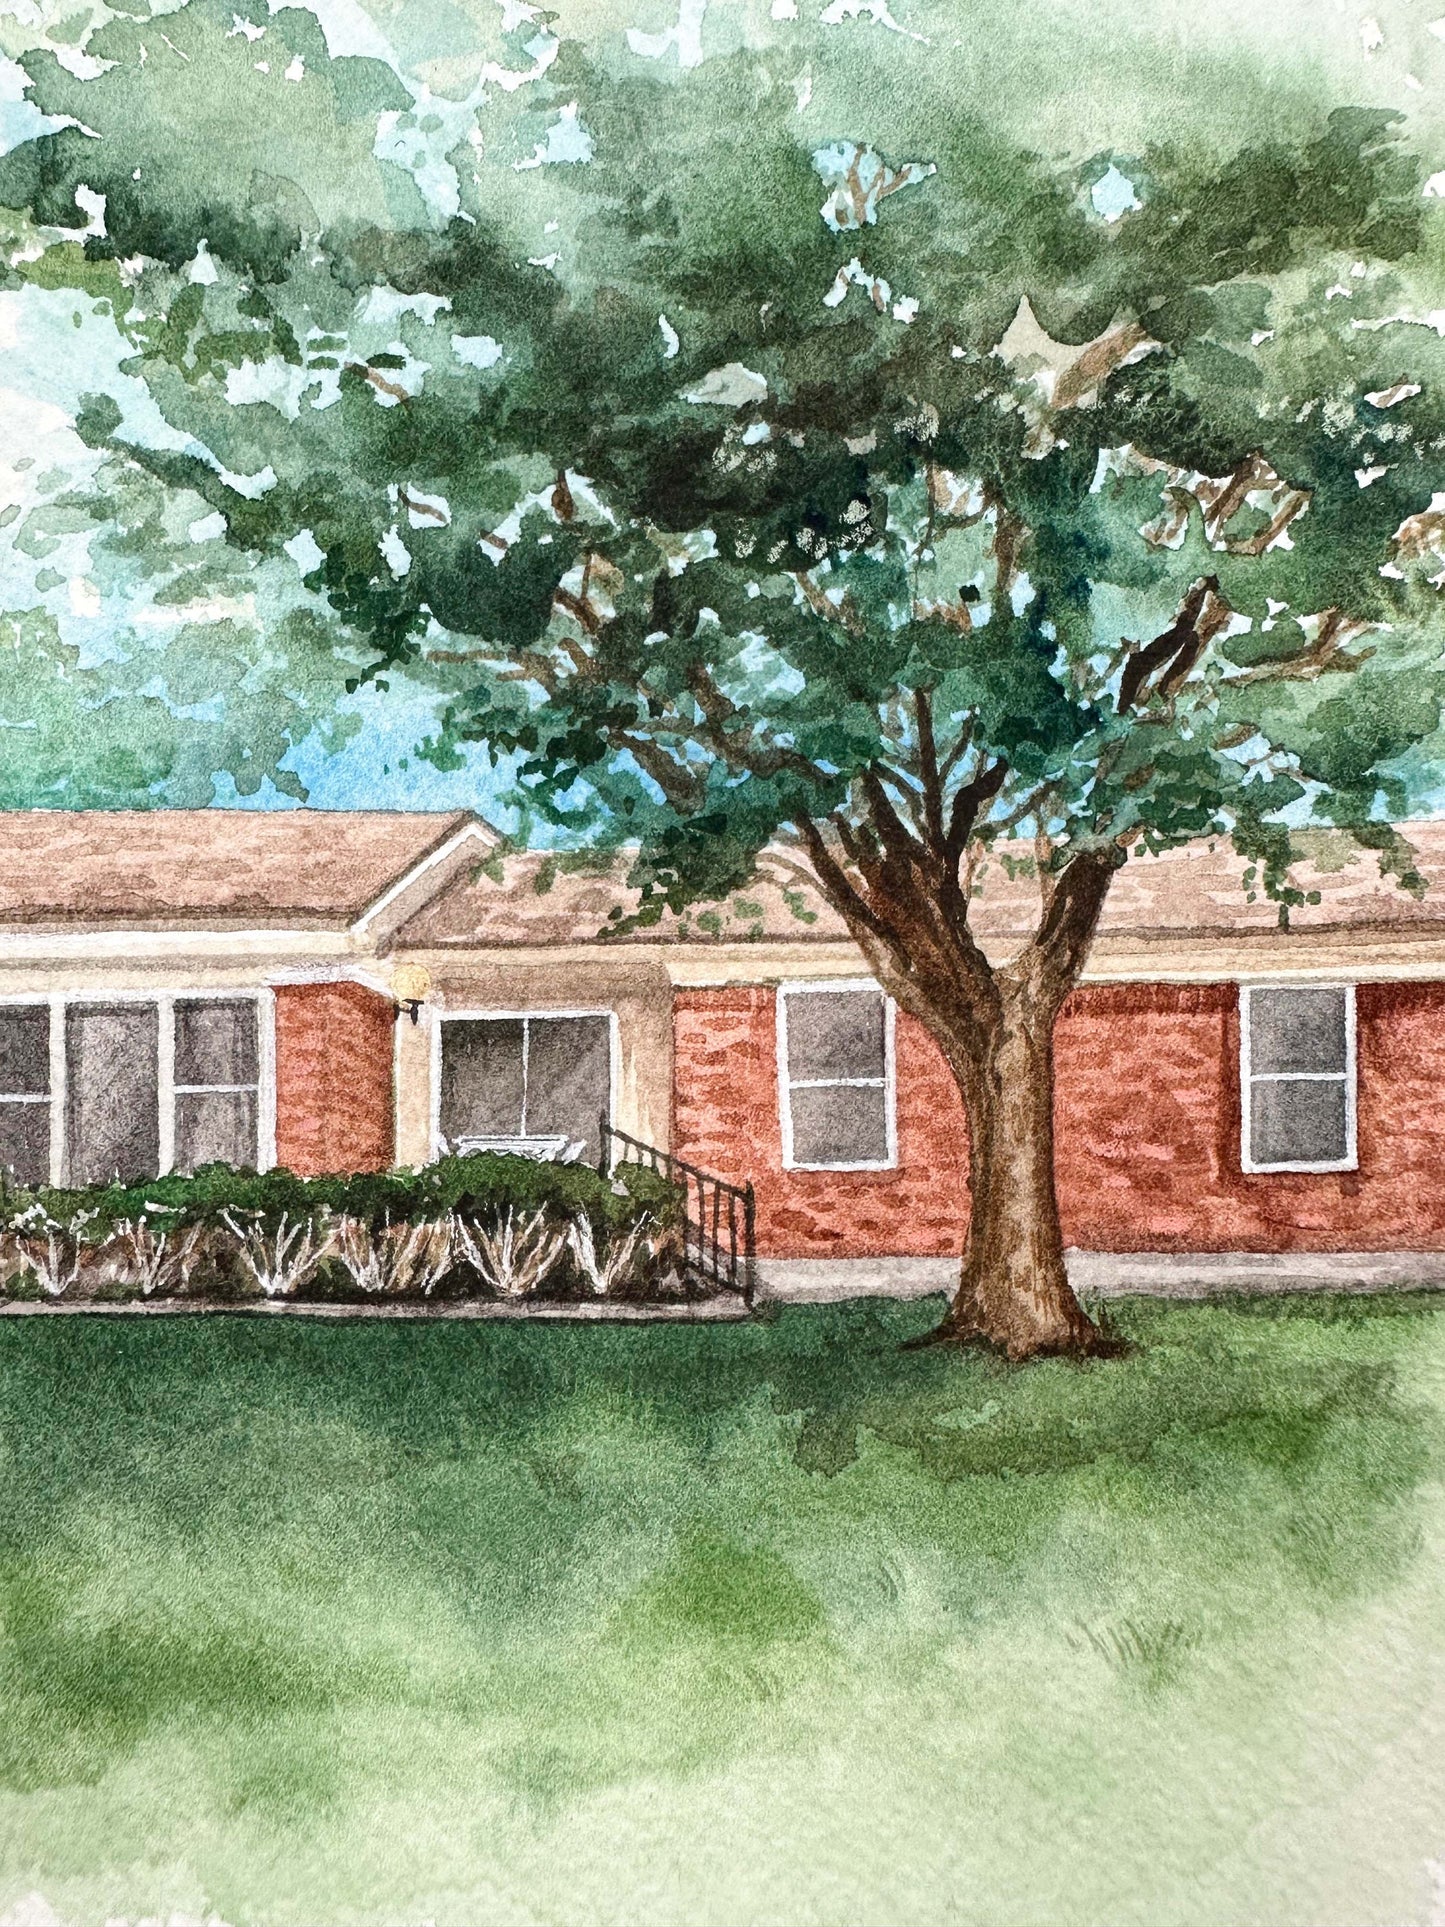 Custom Watercolor House Painting, Made to order, Home Portrait